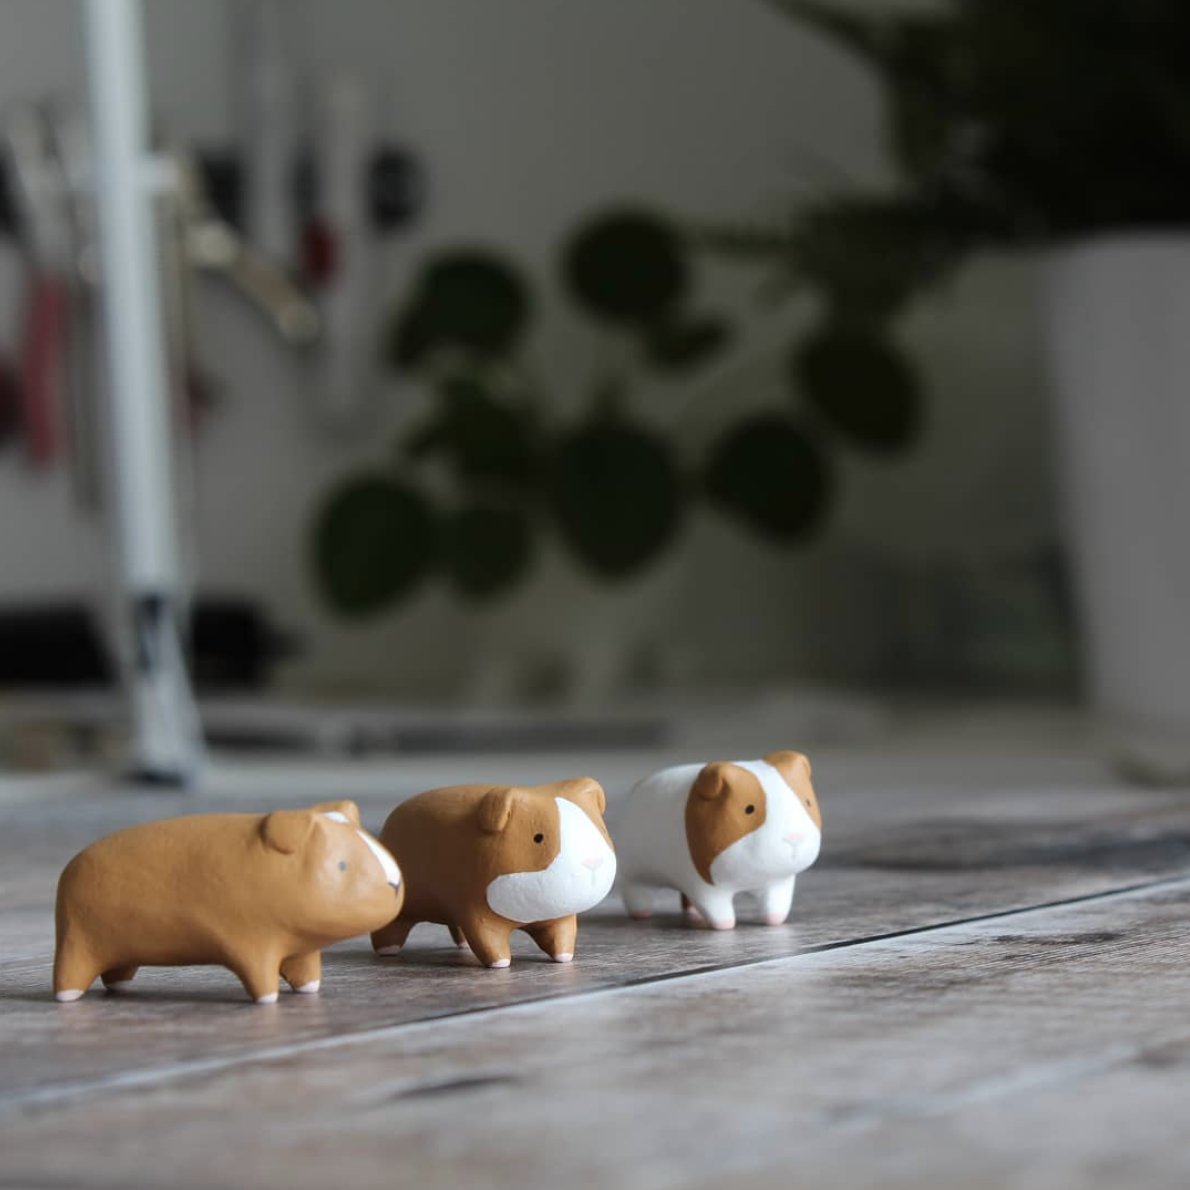 Mini animal figures from air dry clay – Falling Fauna on Instagram